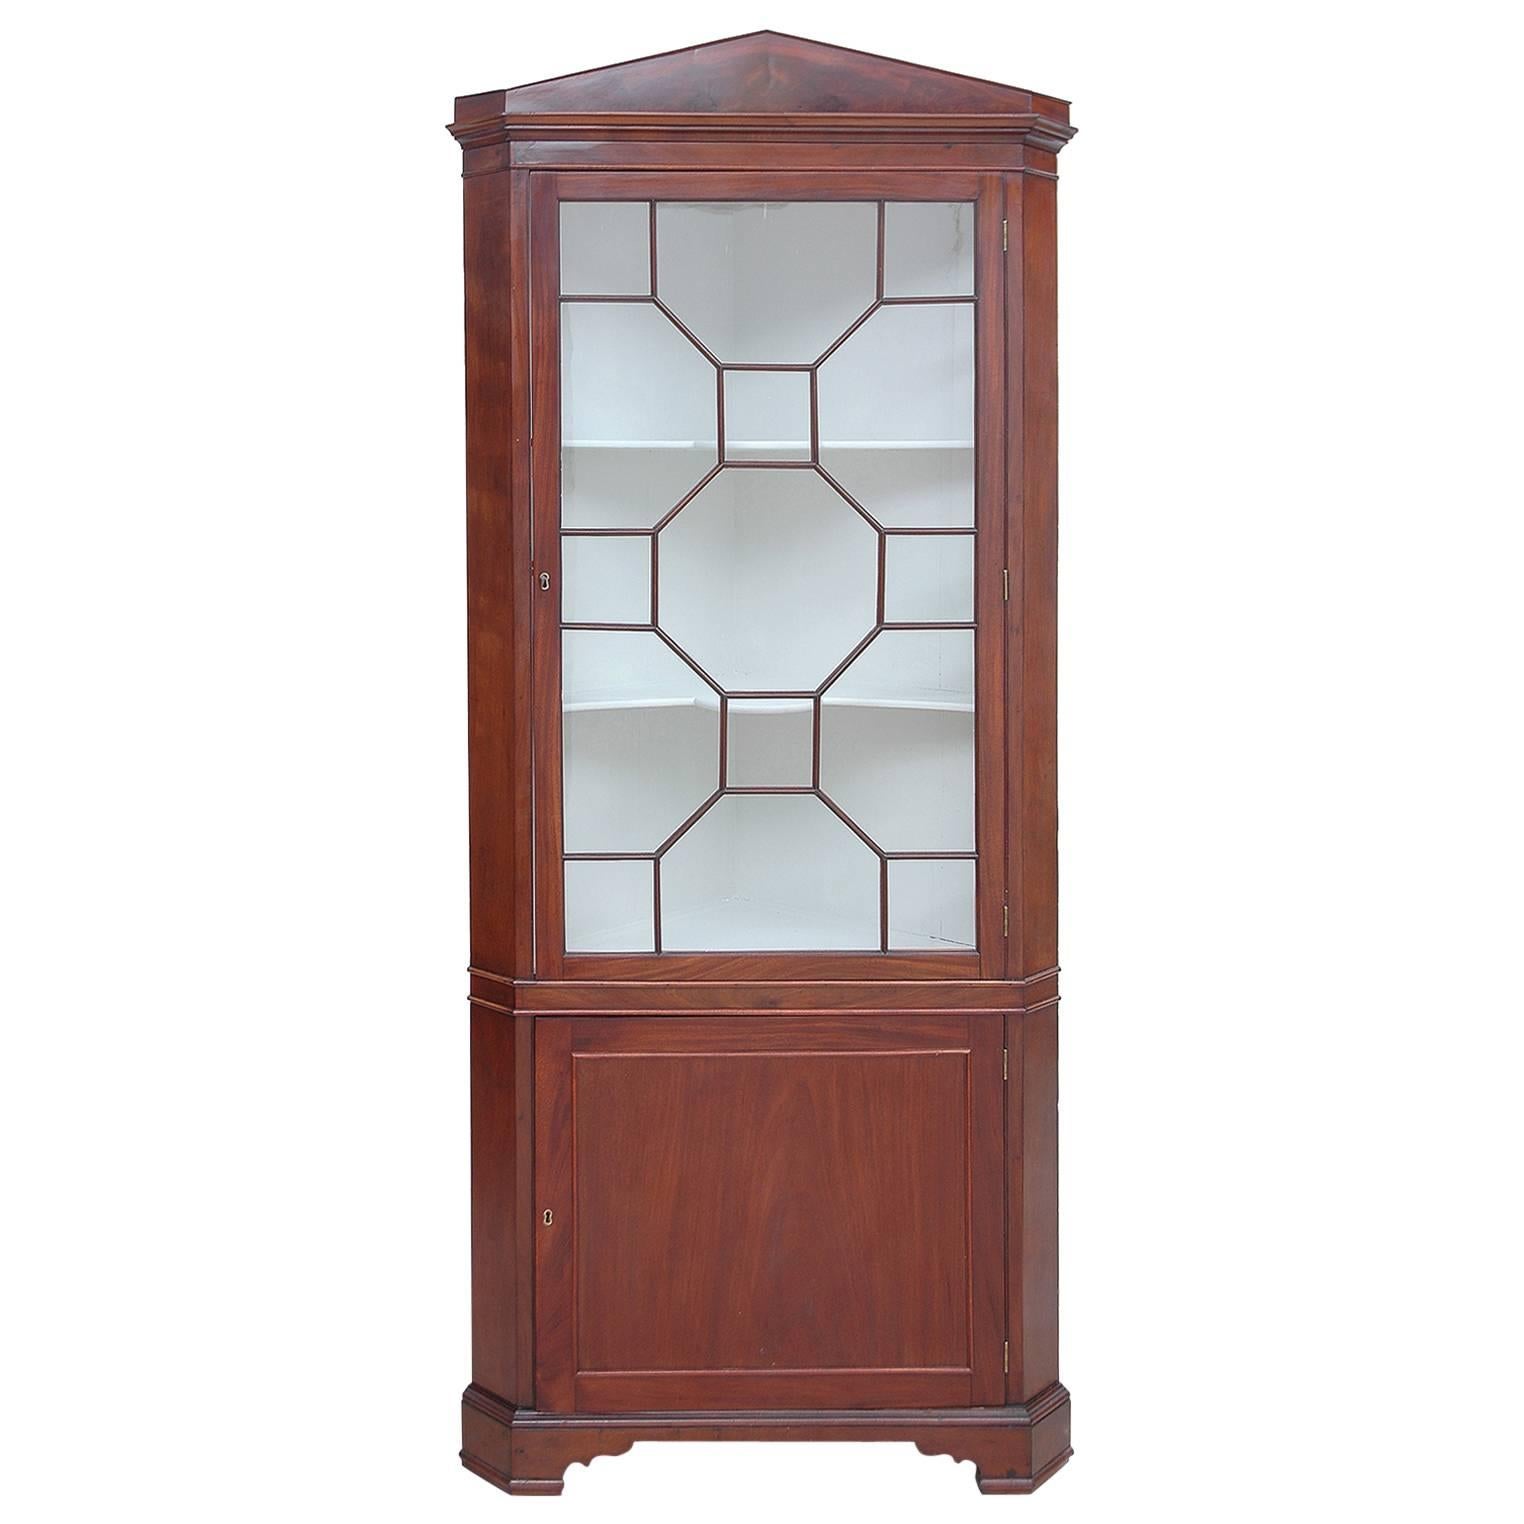 English Regency Corner Cabinet in Mahogany with Glass Door Panels, circa 1820 For Sale